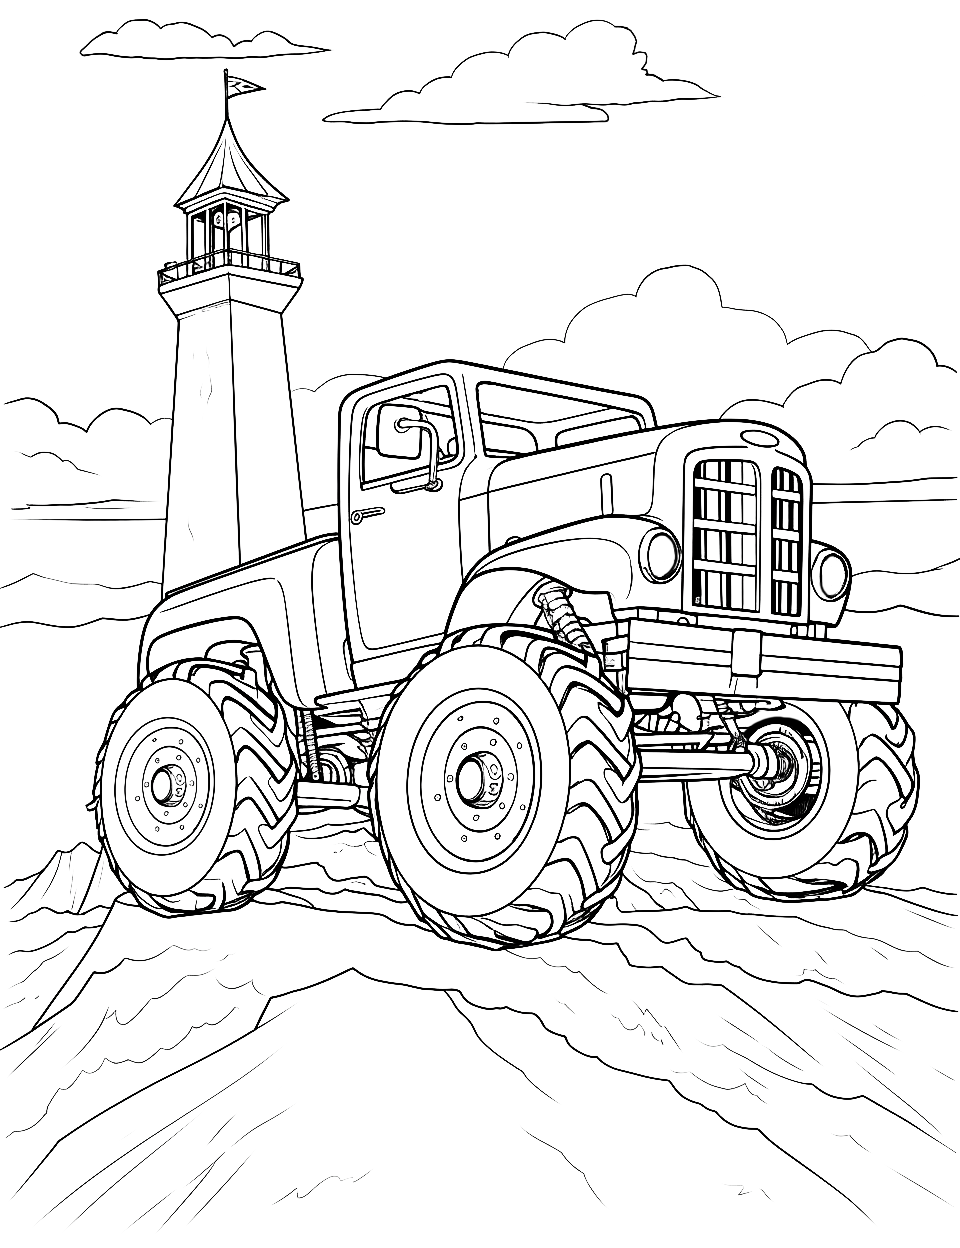 Lighthouse Monster Truck Coloring Page - A monster truck on a hill with a lighthouse backdrop.